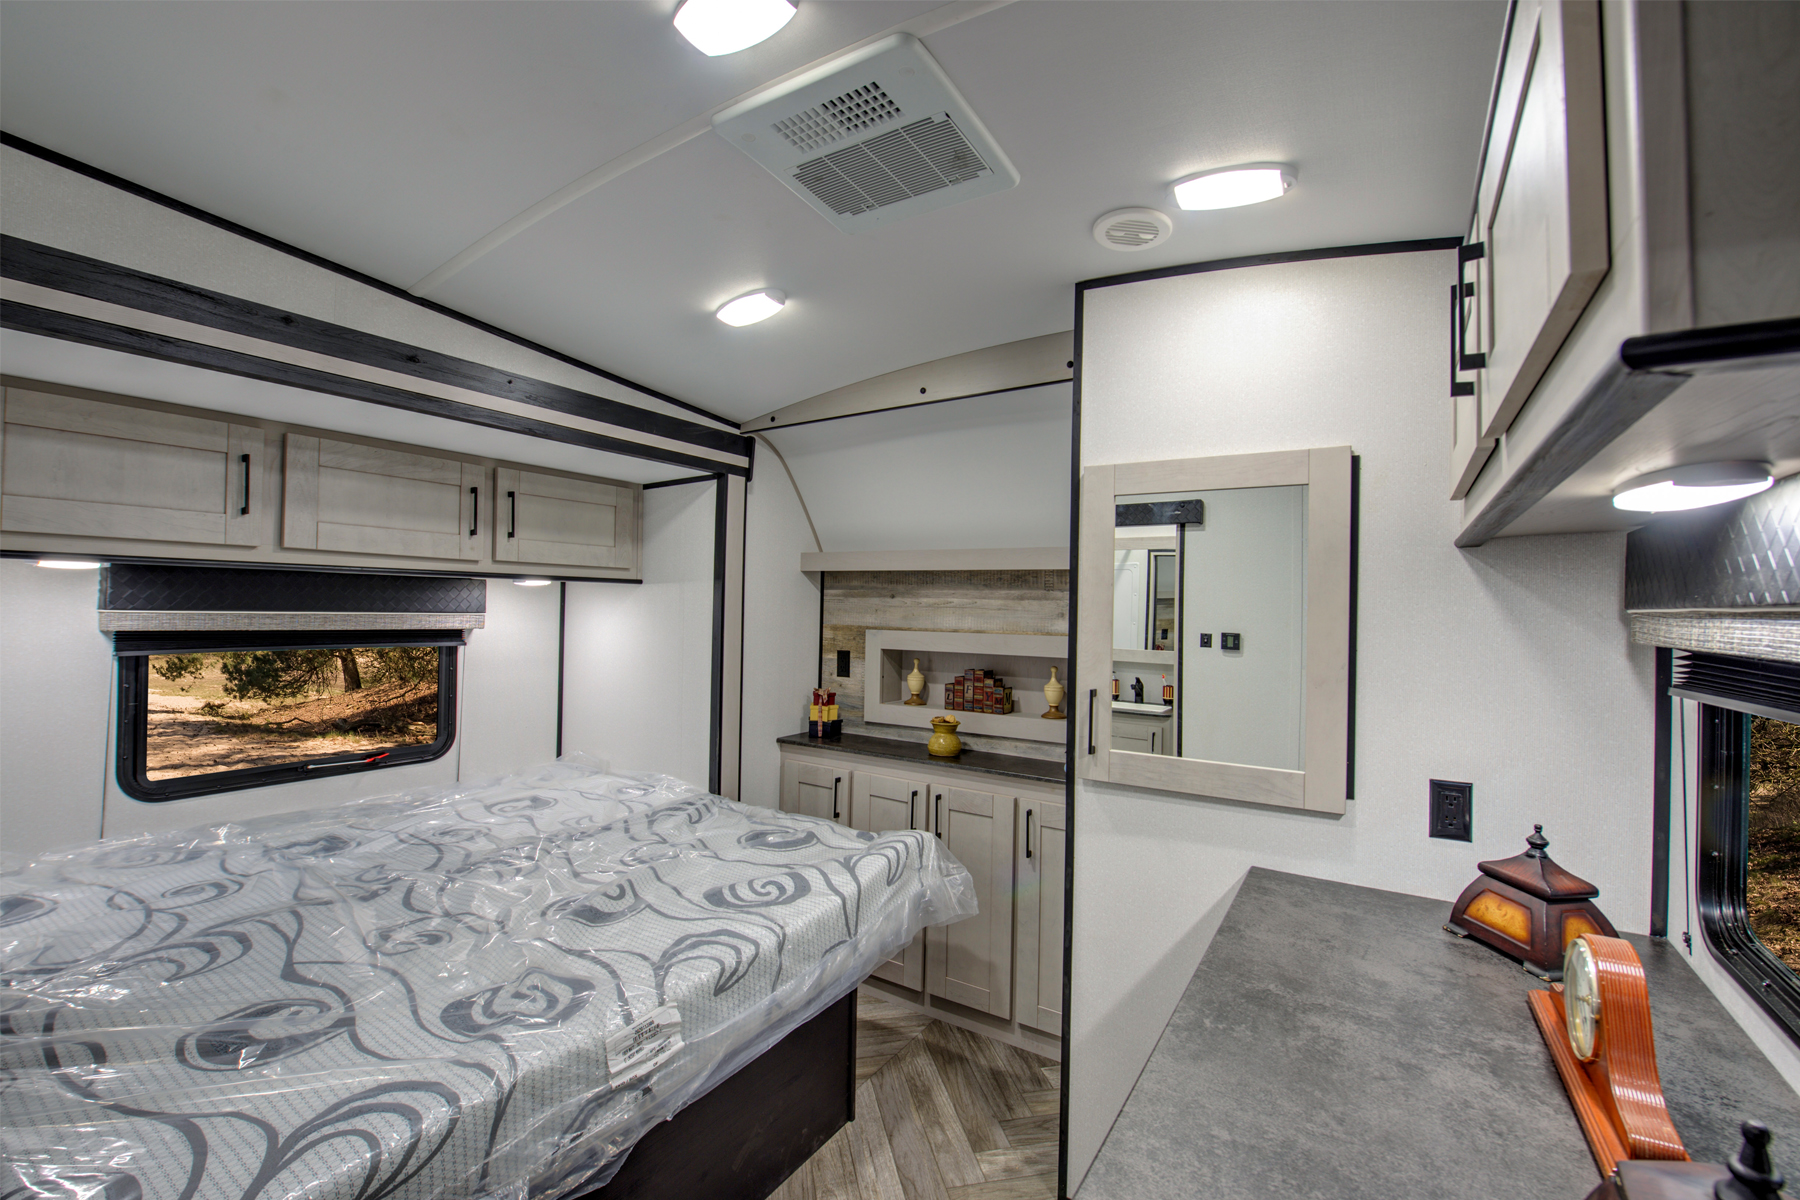 2023 HEARTLAND TORQUE TRAVEL TRAILER - T274 for sale in the Pompano Beach, FL area. Get the best drive out price on 2023 HEARTLAND TORQUE TRAVEL TRAILER - T274 and compare.